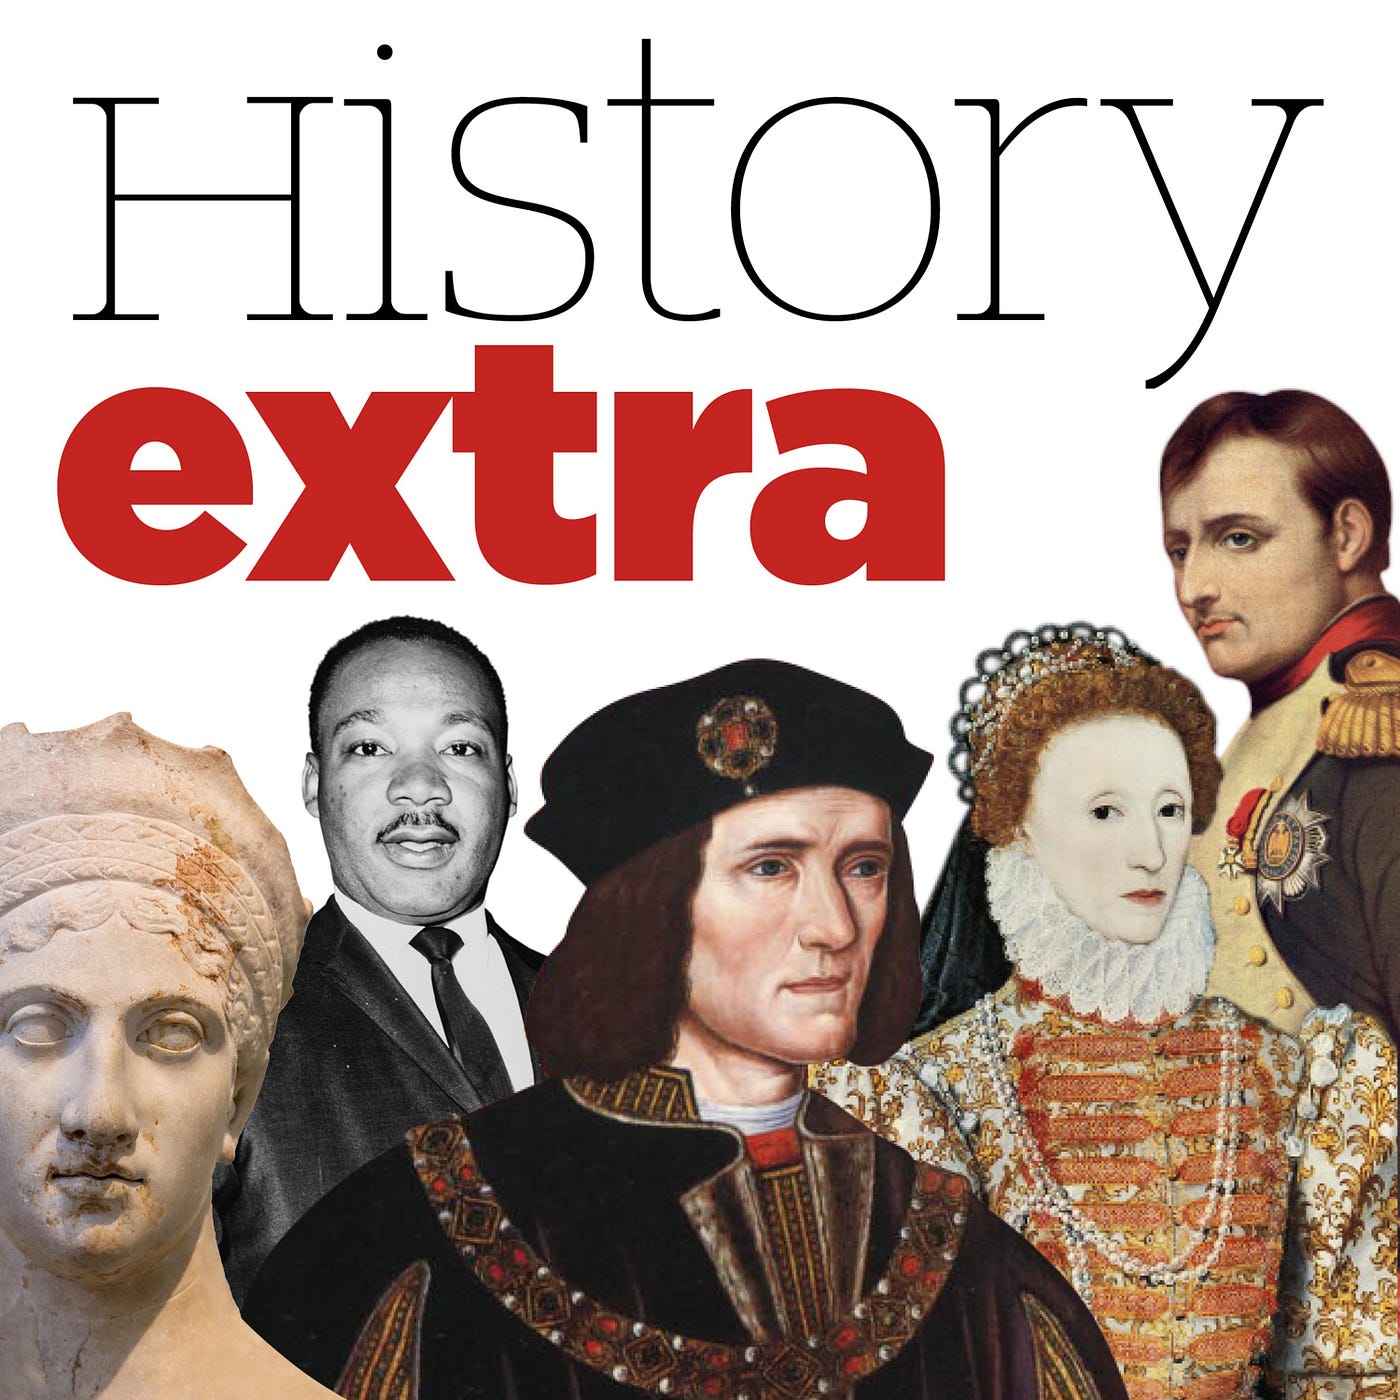 historical biography podcast